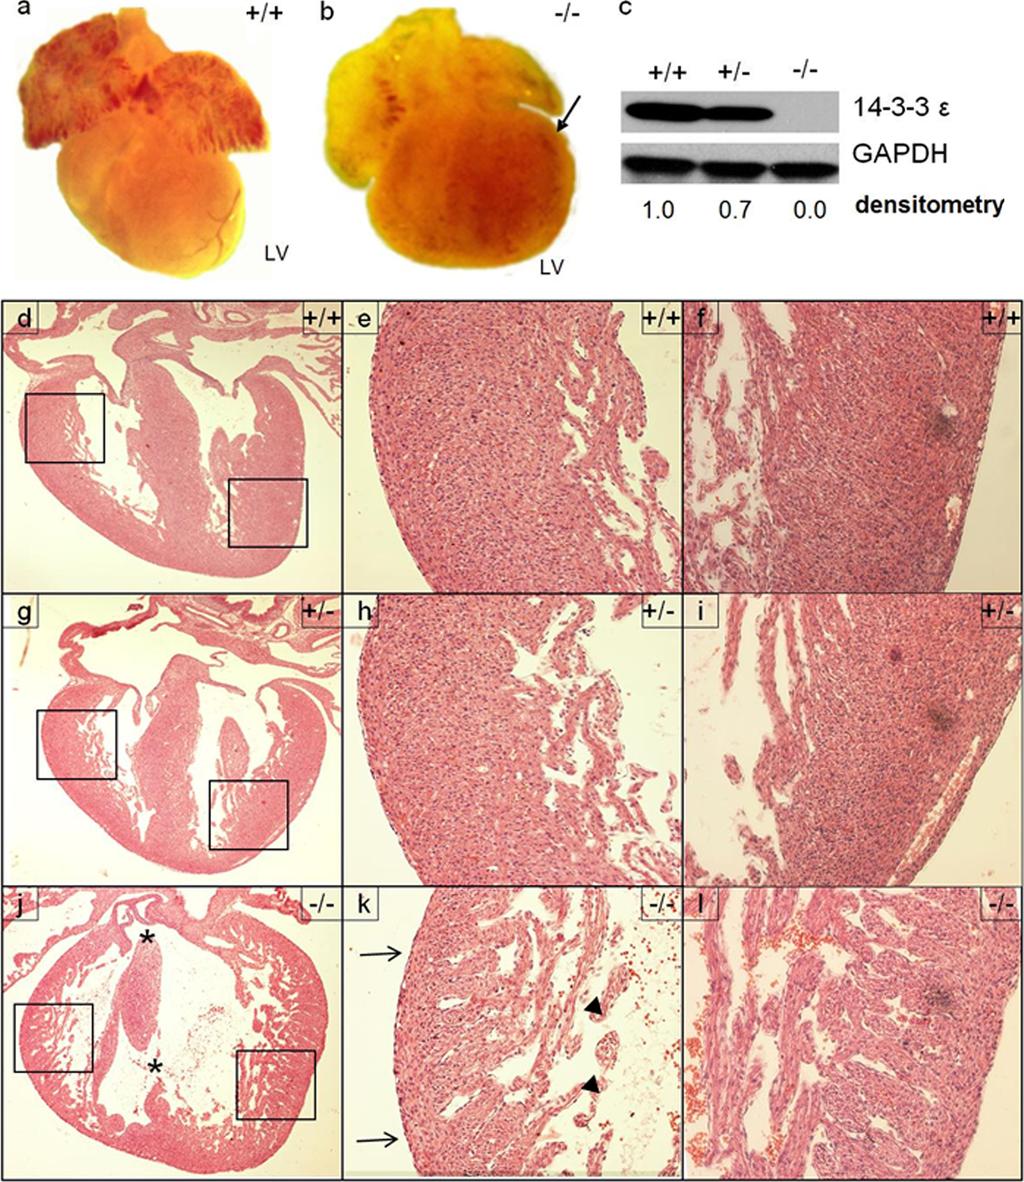 Kosaka et al. histone H3 phosphorylated at serine 10 (PH3), was significantly decreased in 14-3-3 / hearts (Fig.